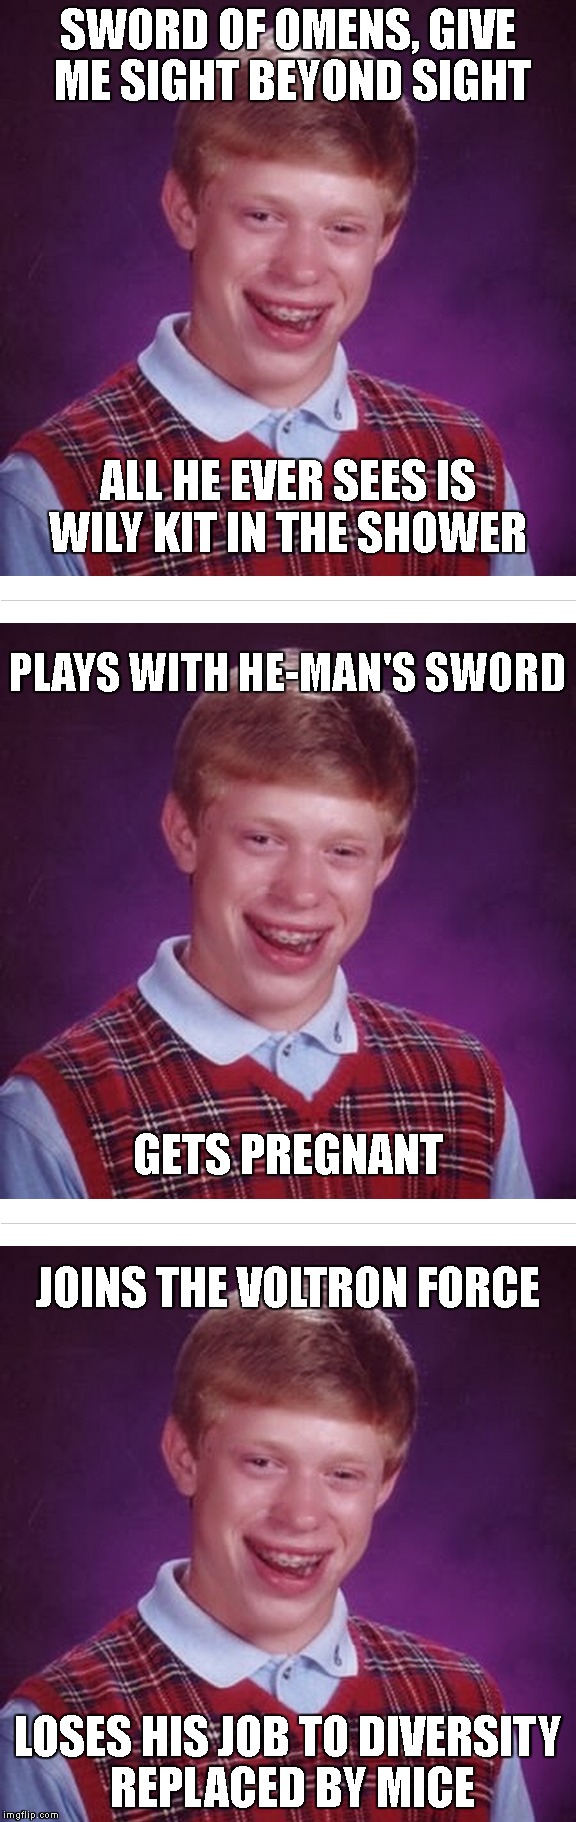 Bad Luck Brian 80's Mega Hero | SWORD OF OMENS, GIVE ME SIGHT BEYOND SIGHT; ALL HE EVER SEES IS WILY KIT IN THE SHOWER; PLAYS WITH
HE-MAN'S SWORD; GETS PREGNANT; JOINS THE VOLTRON FORCE; LOSES HIS JOB TO DIVERSITY REPLACED BY MICE | image tagged in bad luck brian,thundercats,he-man,voltron,80's,1980's | made w/ Imgflip meme maker